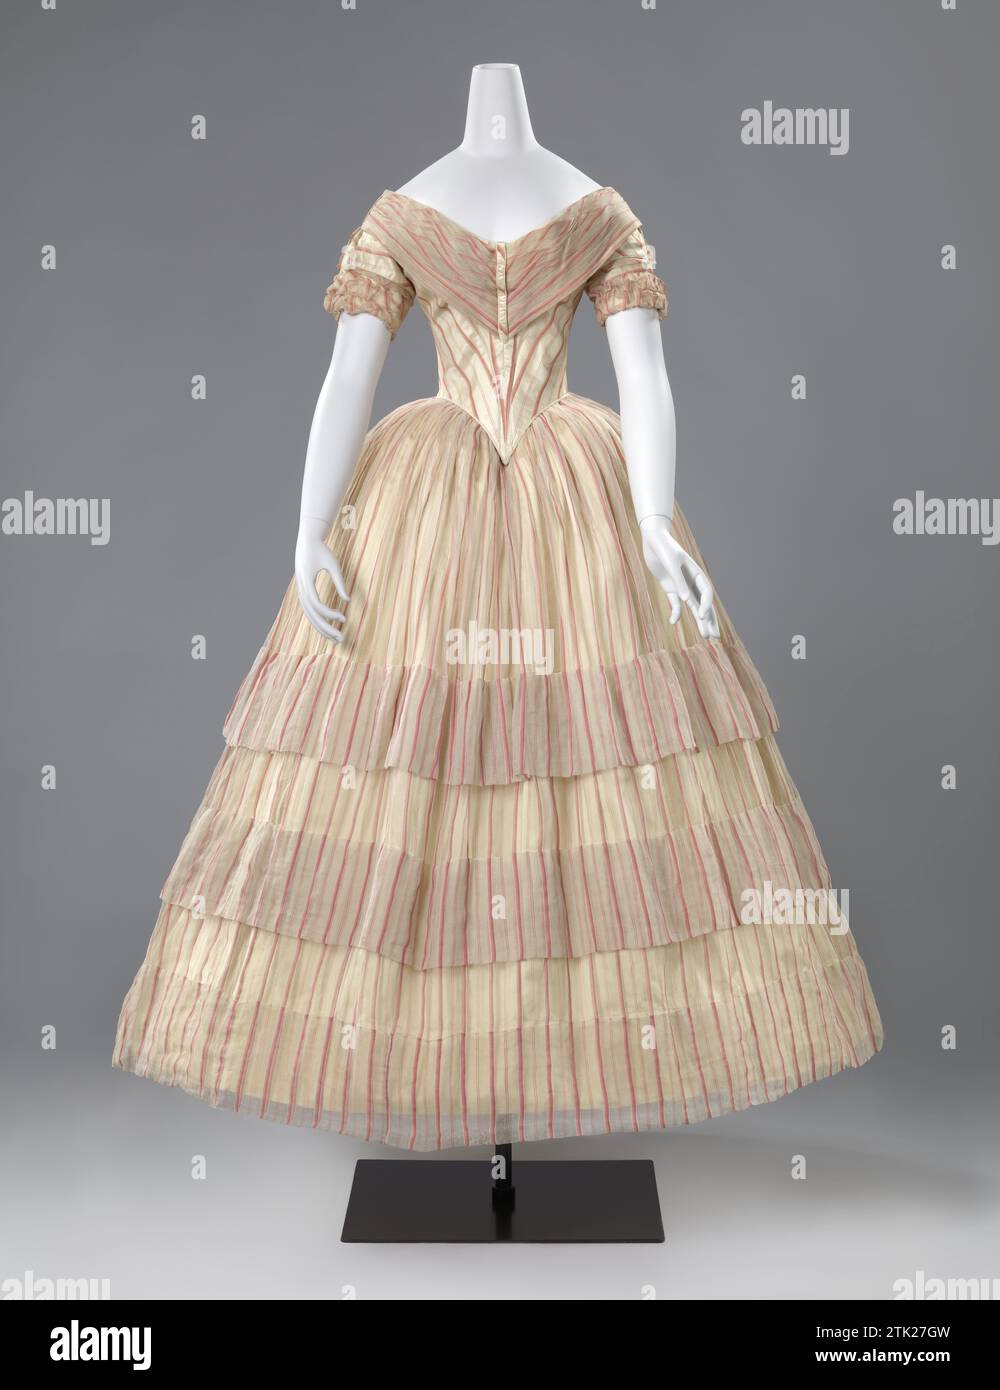 Full Evening Dress, anonymous, c. 1850 - c. 1856 Girl's dress of white Tarlatan with pink stripes. The low -cut body has short sleeves and ends pointy from the front over the skirt, to which it is sewn. The spacious skirt is unlined, has two wide ramps and a wide zoom. I.v.m. Exhibition was made of the crème satin in 1996 (A-1) at the dress in 1996. Netherlands tarlatan. cotton (textile). satin. silk. metal Girl's dress of white Tarlatan with pink stripes. The low -cut body has short sleeves and ends pointy from the front over the skirt, to which it is sewn. The spacious skirt is unlined, has Stock Photo